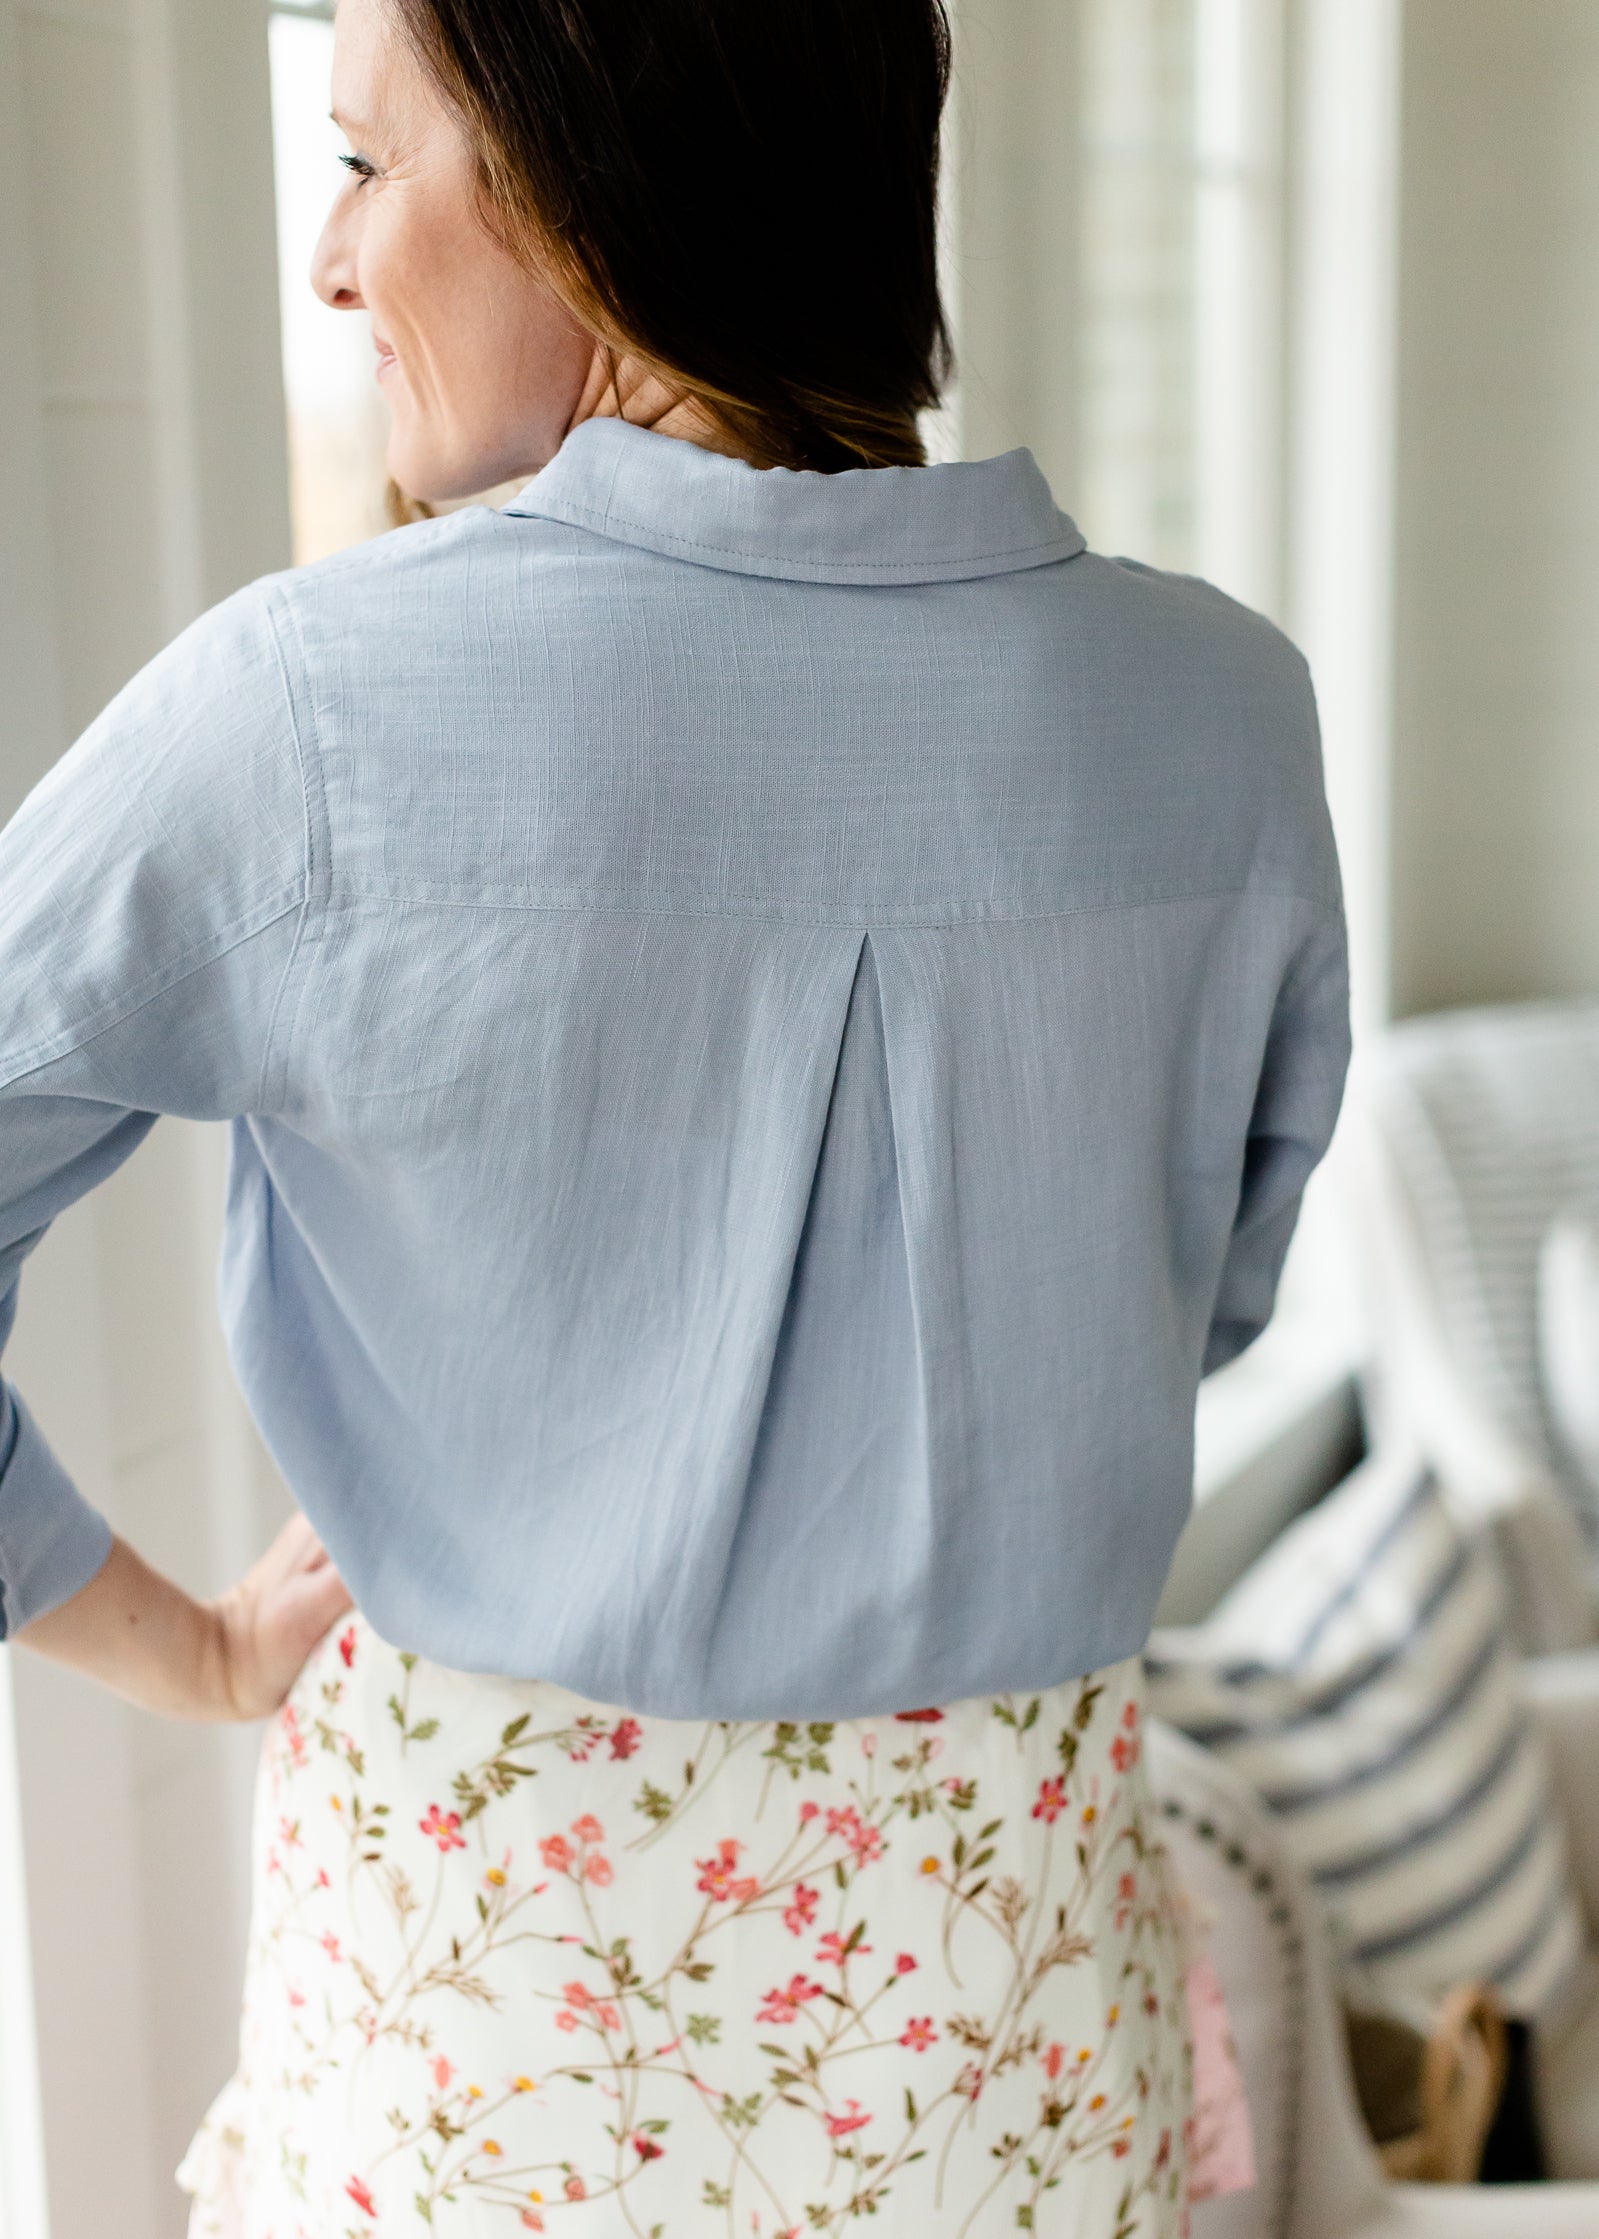 Chambray Style Denim Top - FINAL SALE Tops